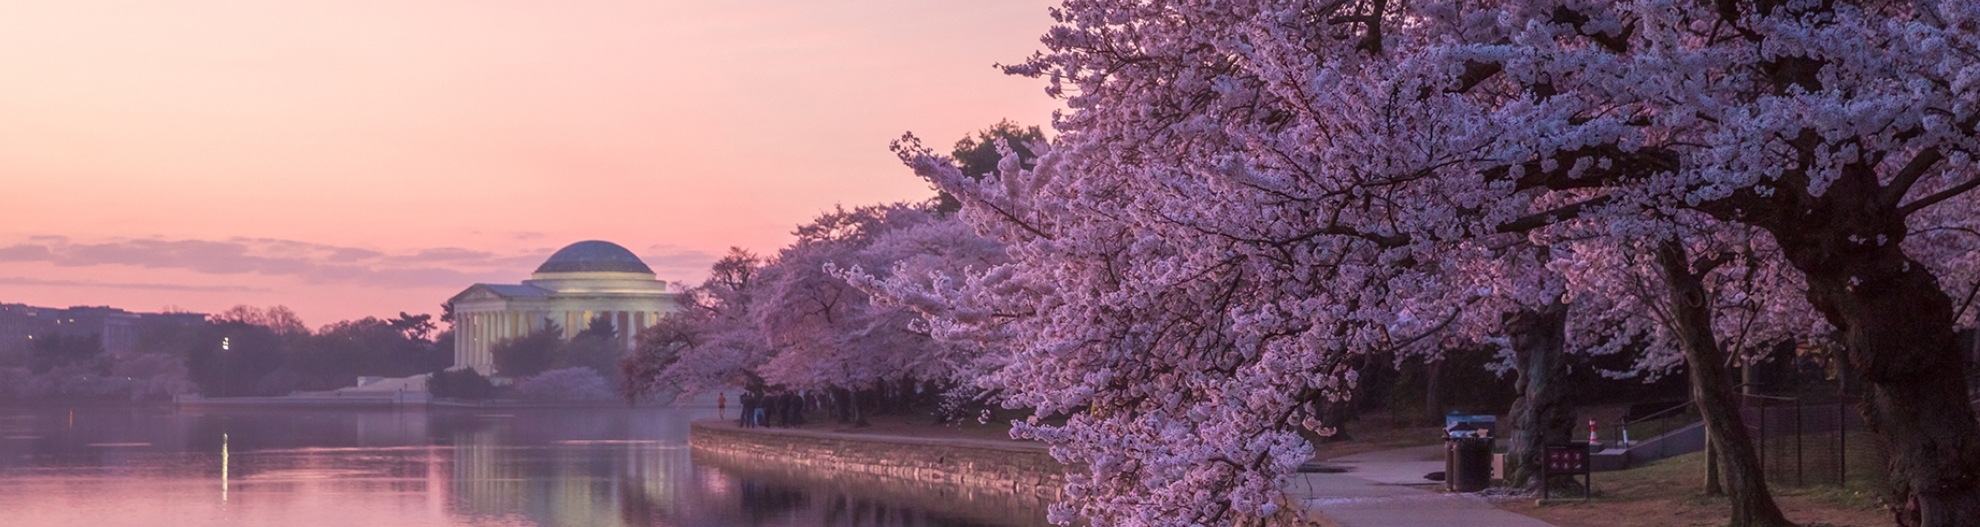 Sunrise at Tidal Basin when the cherry blossoms were in full bloom Washington DC